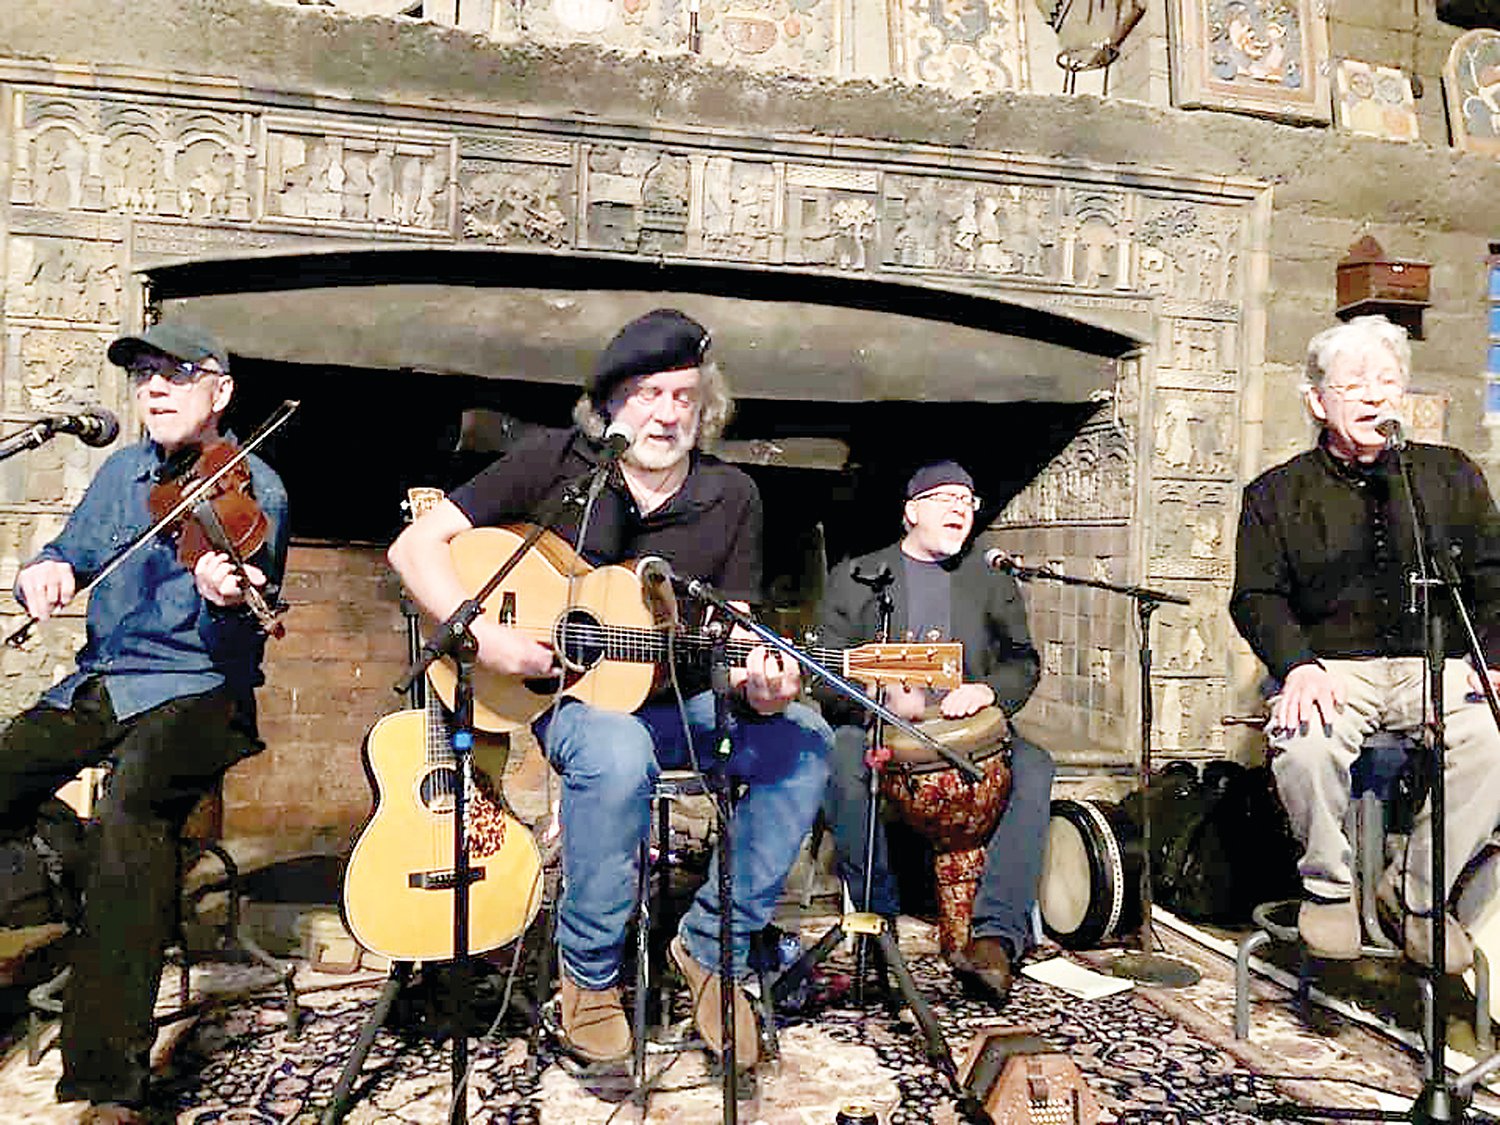 Gf Morgan and Hobnail perform at the Tileworks in Doylestown March 23.